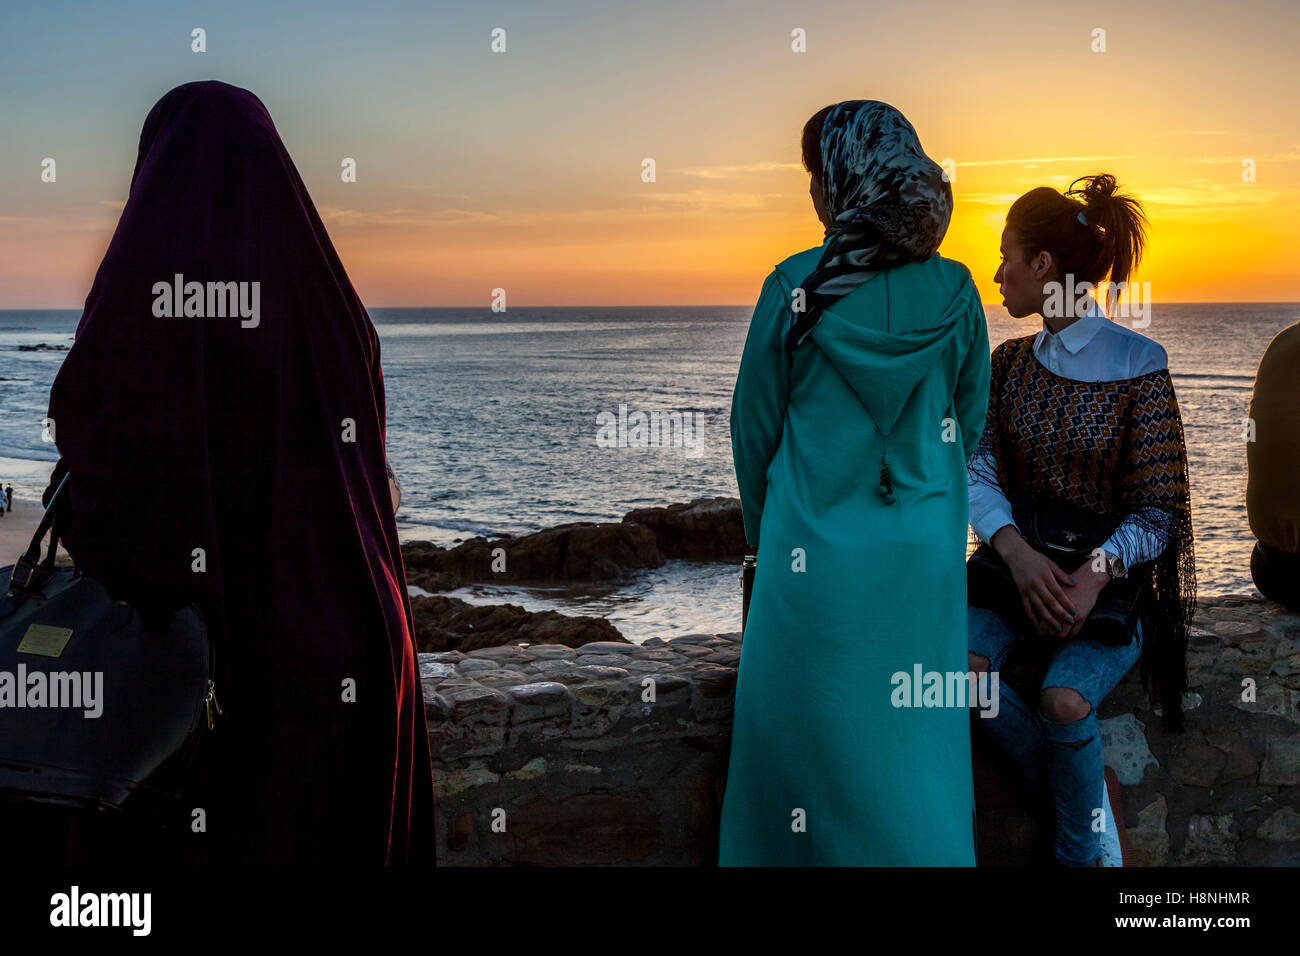 Young Moroccan People Watch The Sunset From A Popular Viewpoint In The Coastal Resort Of Asilah, Morocco Stock Photo